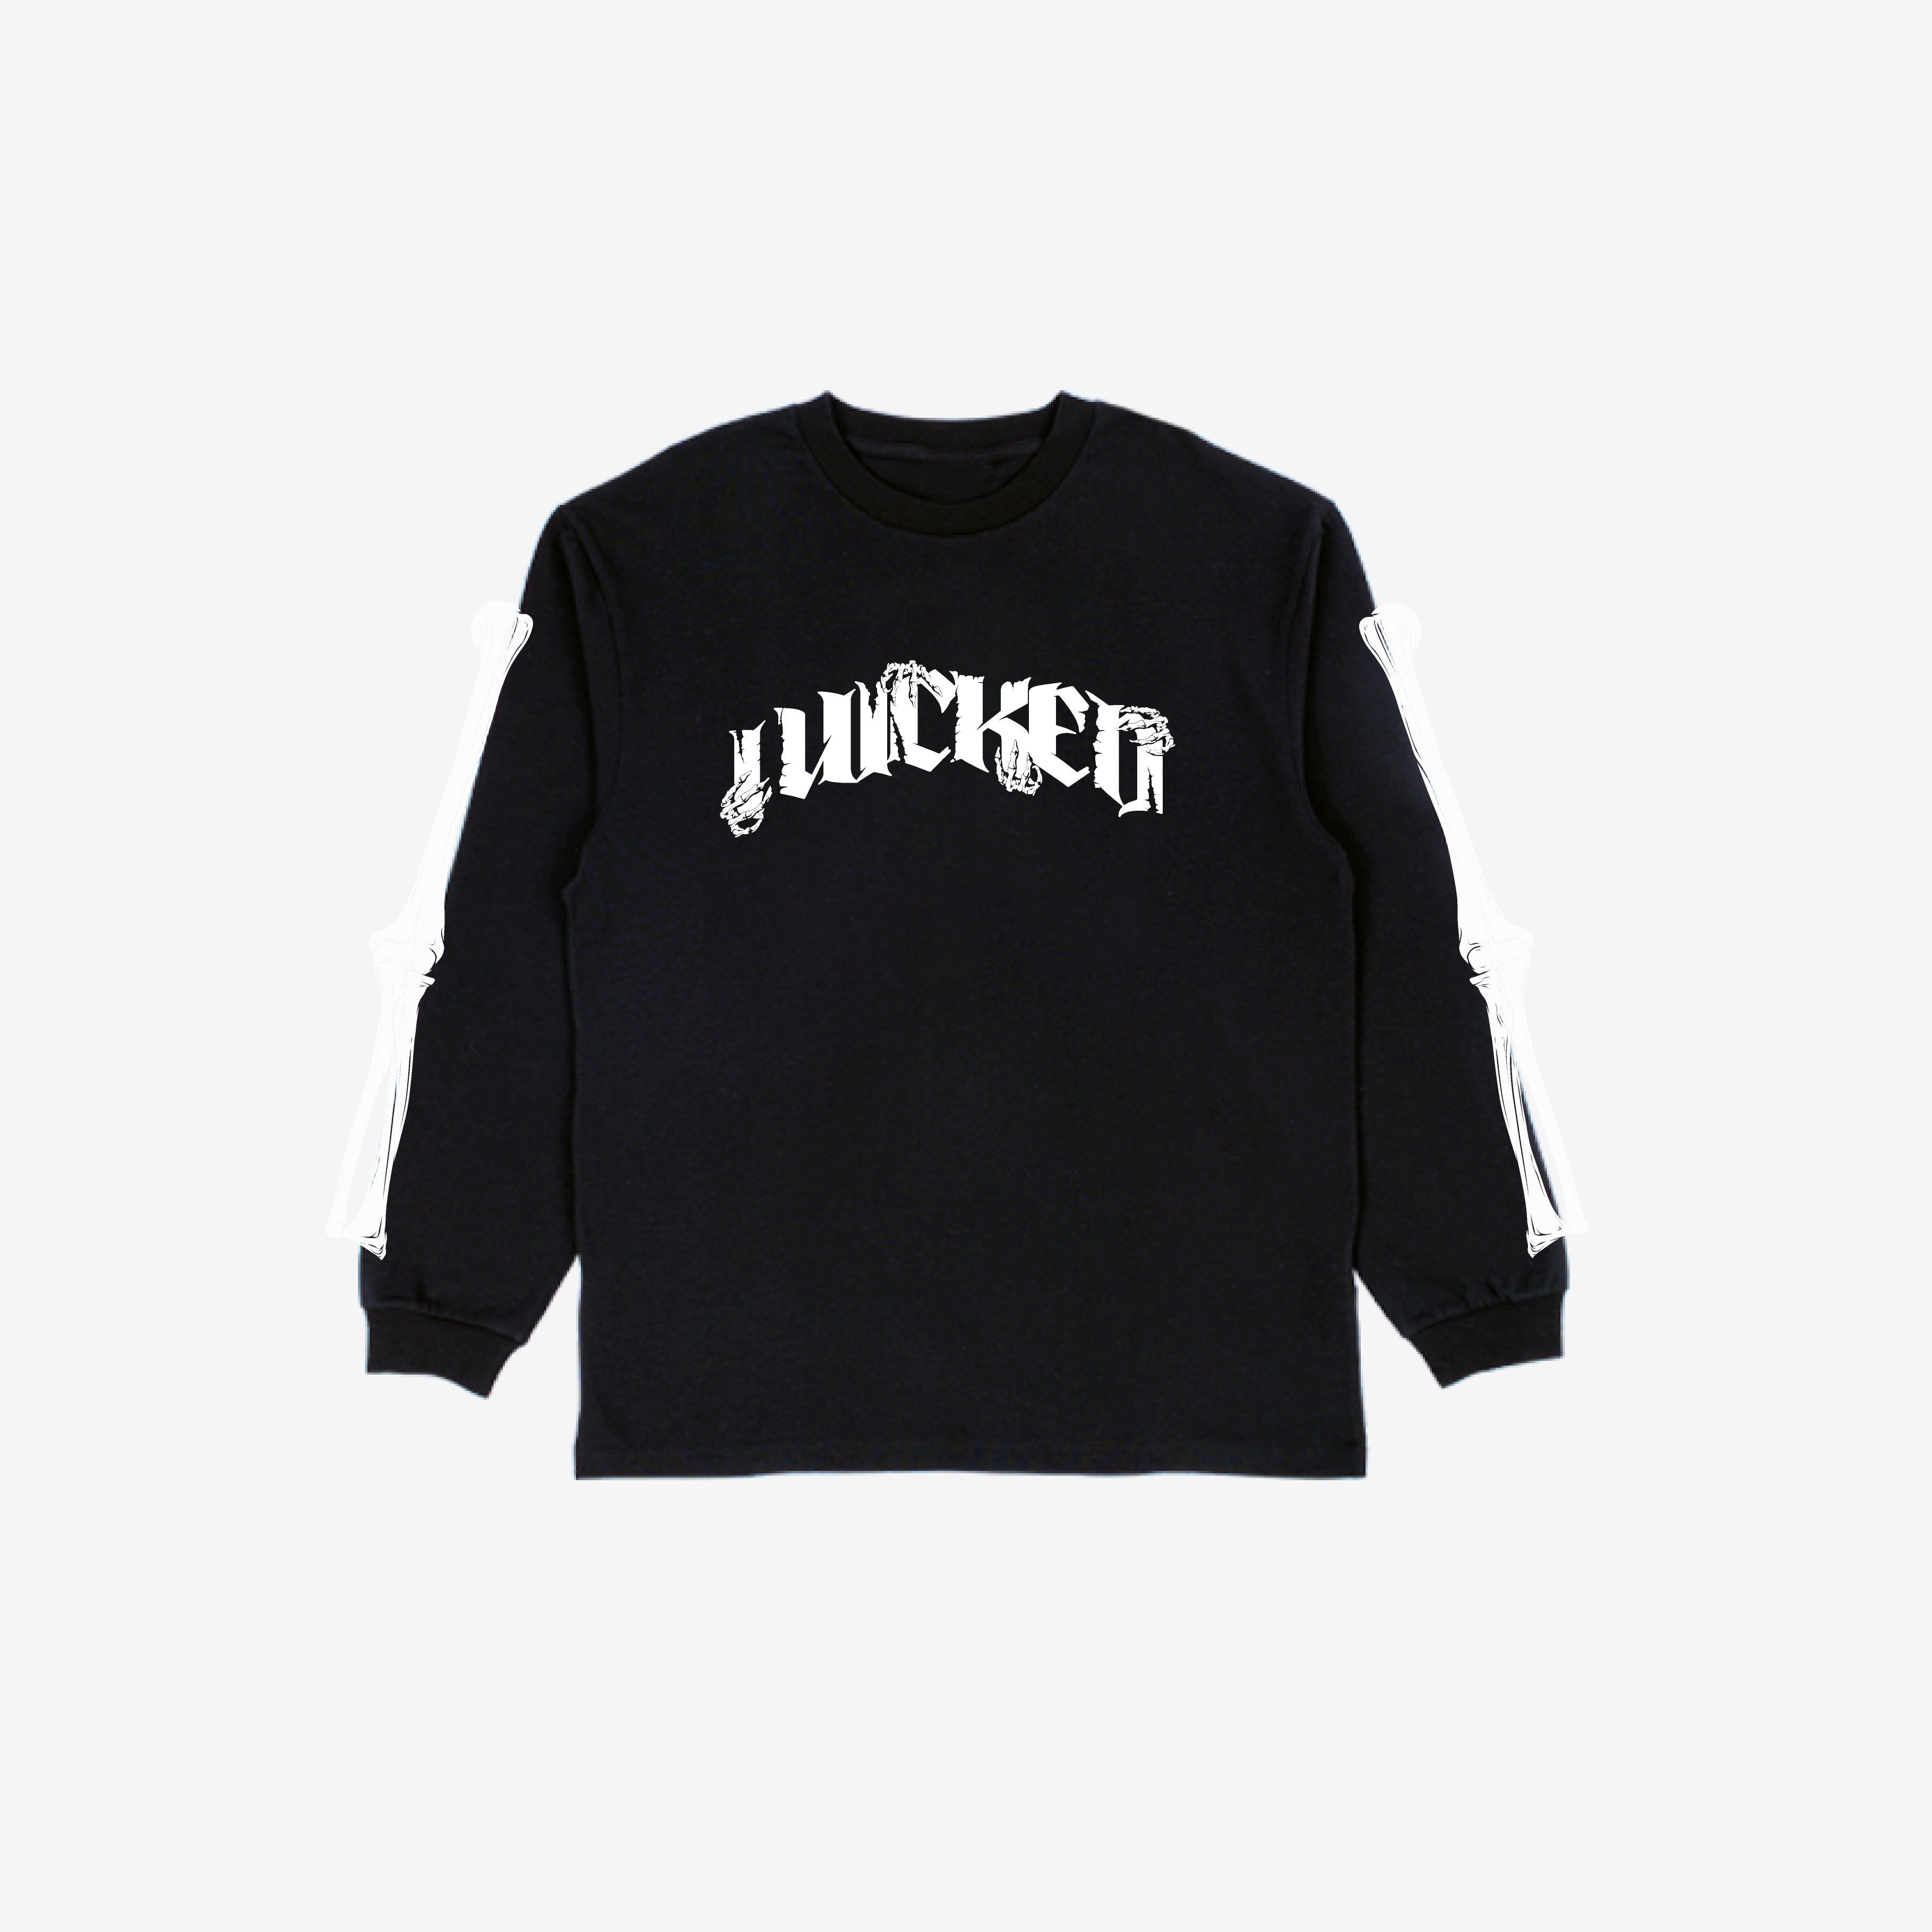 "BACK FROM THE DEAD" L/S TEE (BLACK)